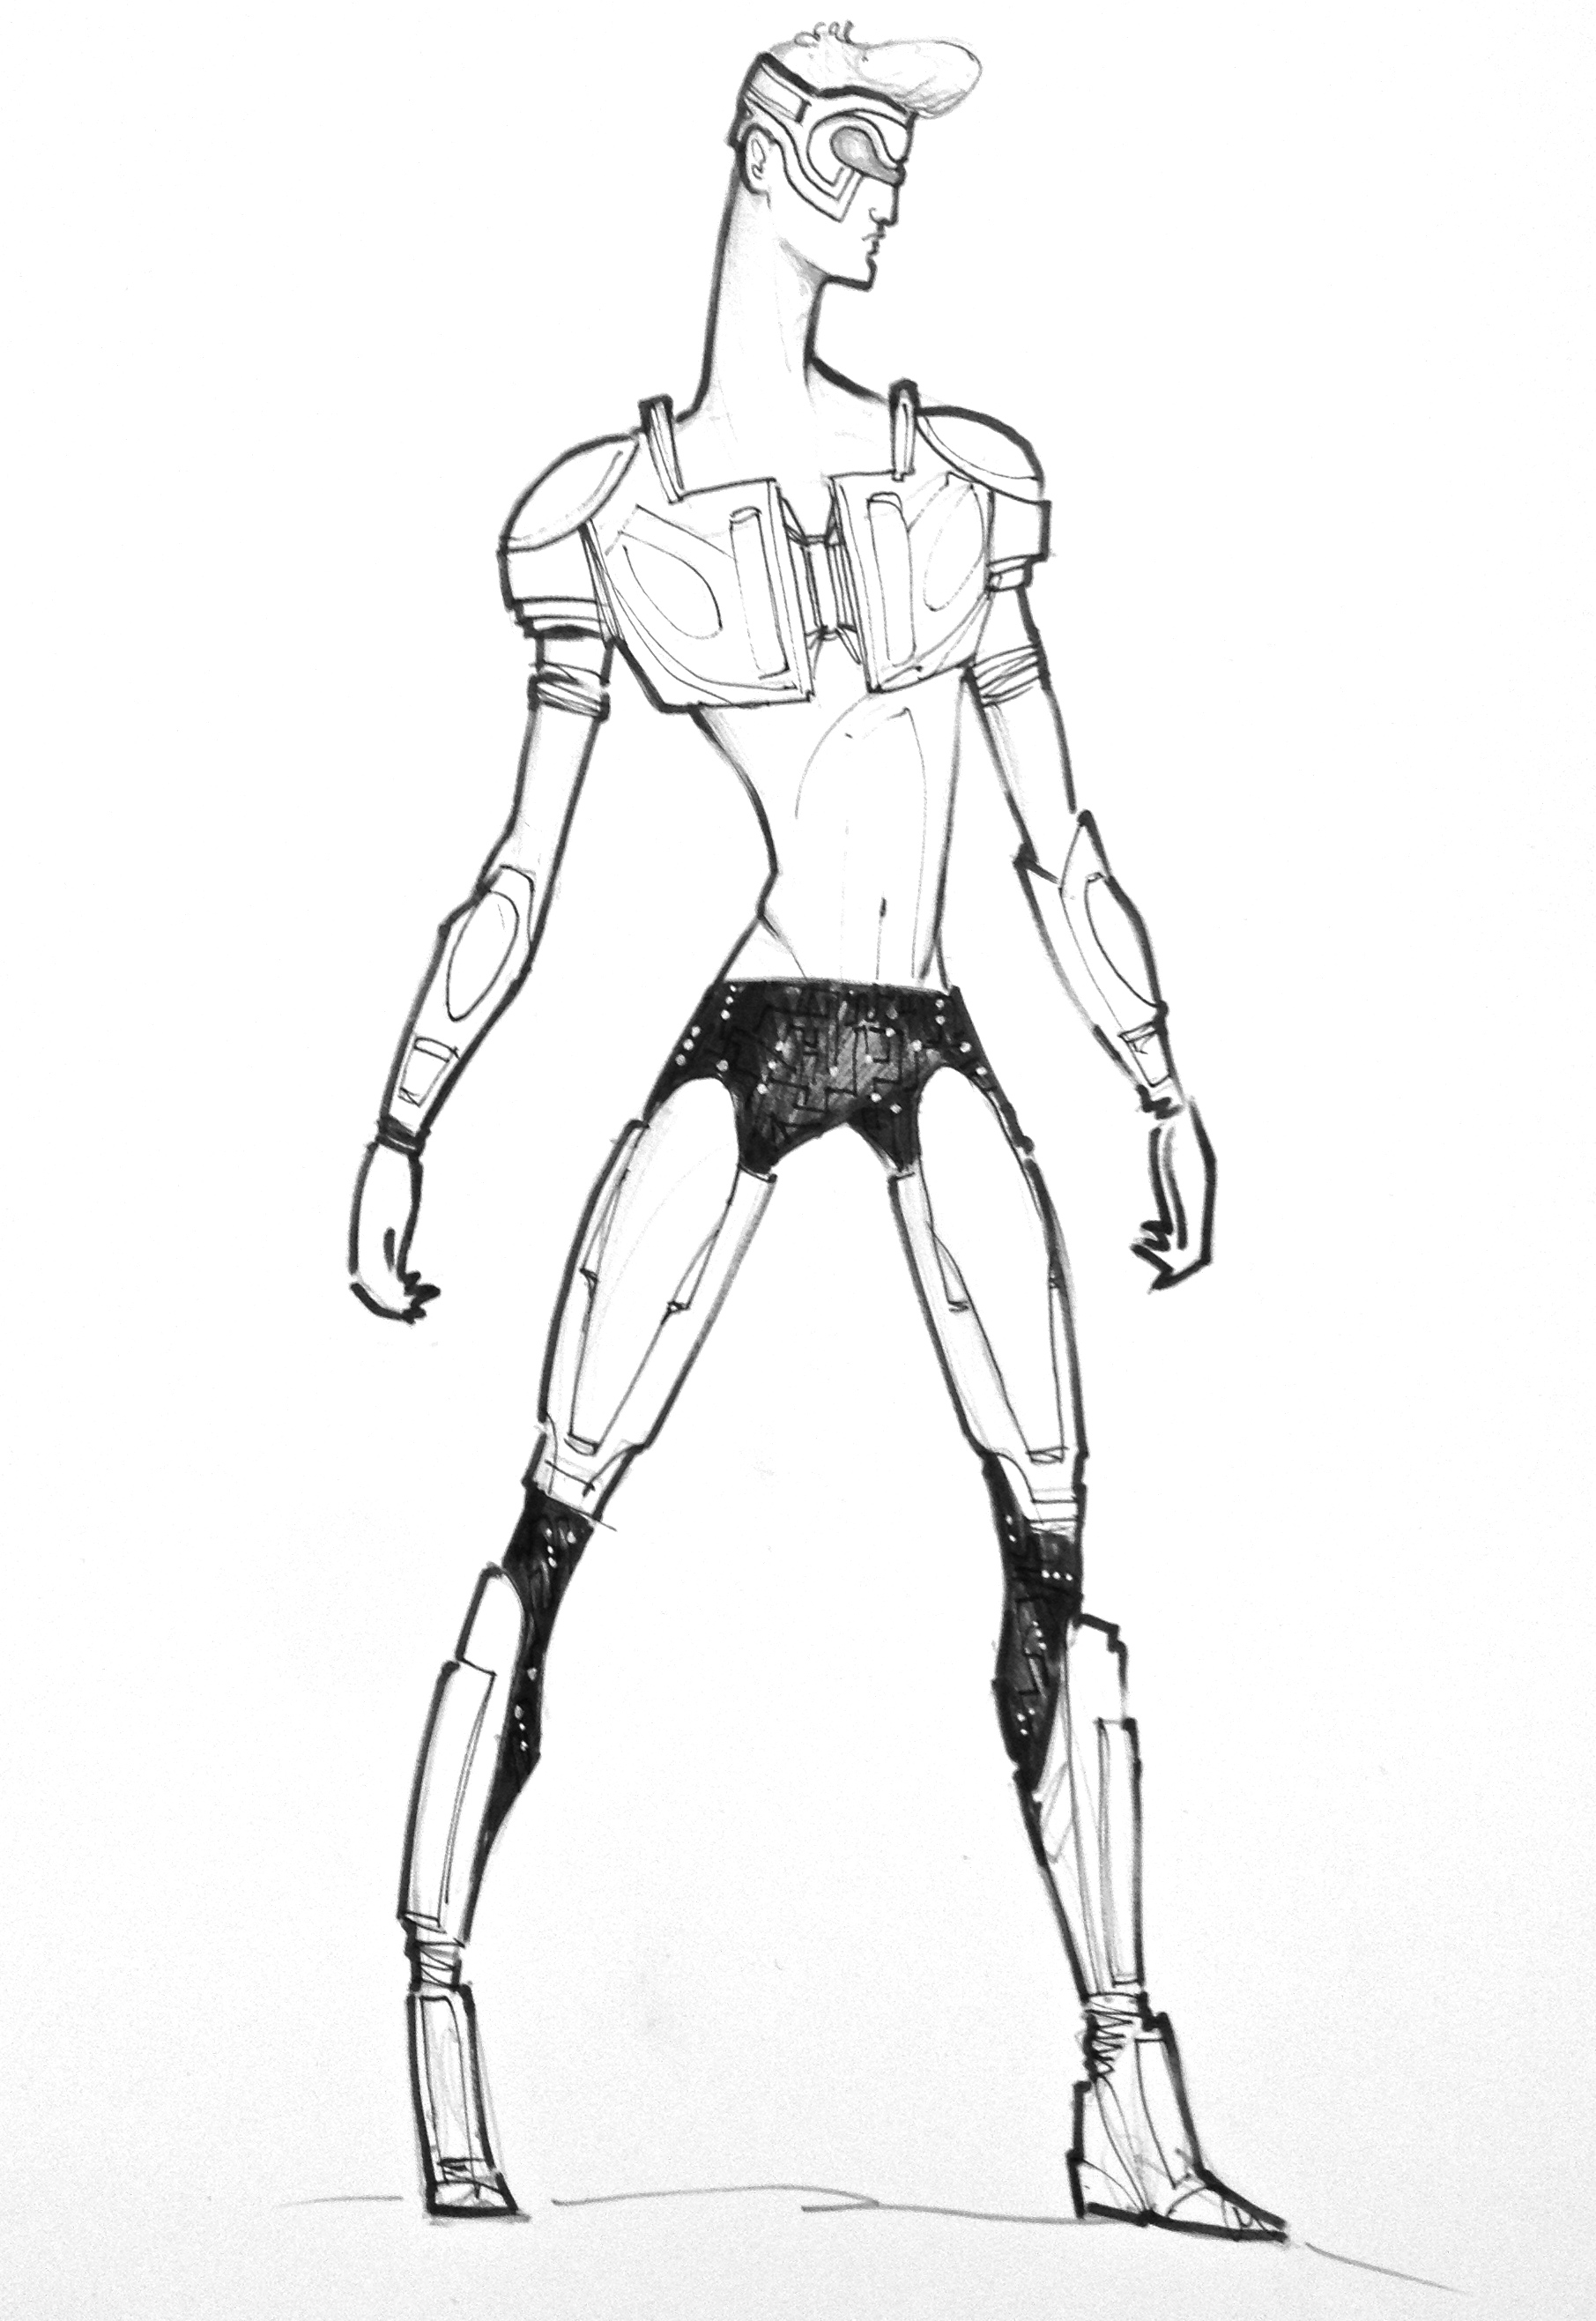  Concept drawing for Asher Levine 